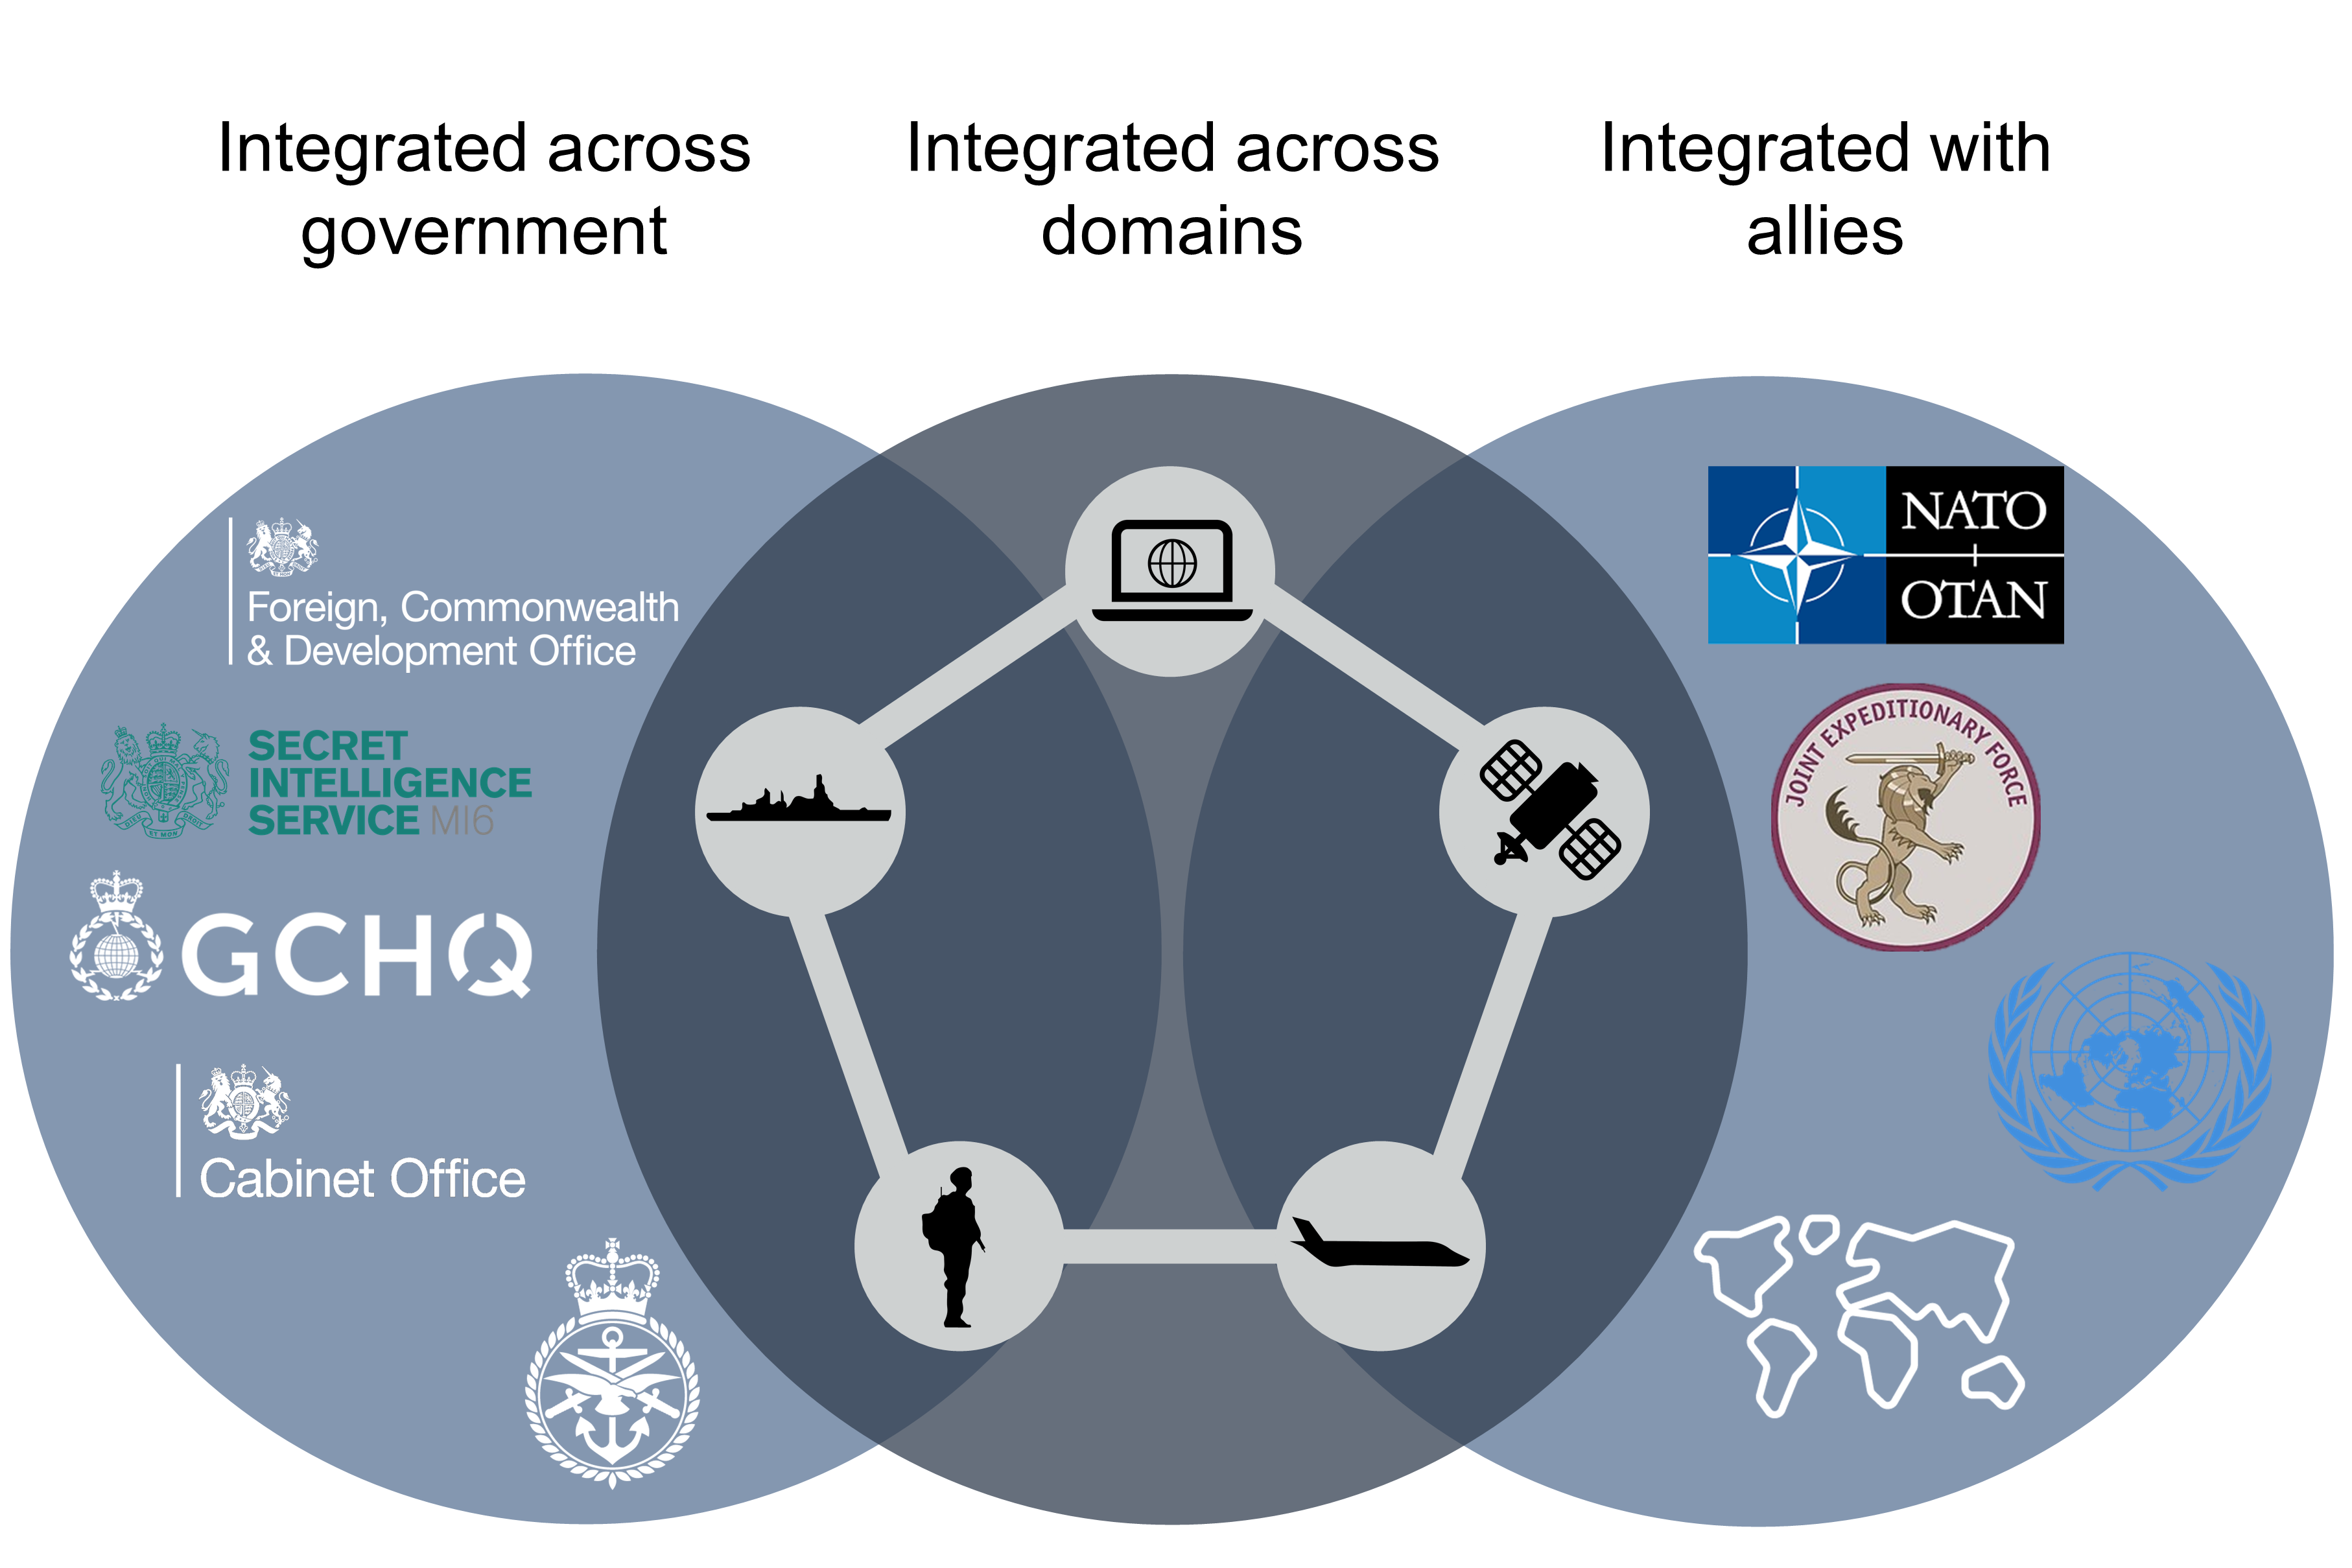 A venn-style diagram explaining integration across government, domains and allies.